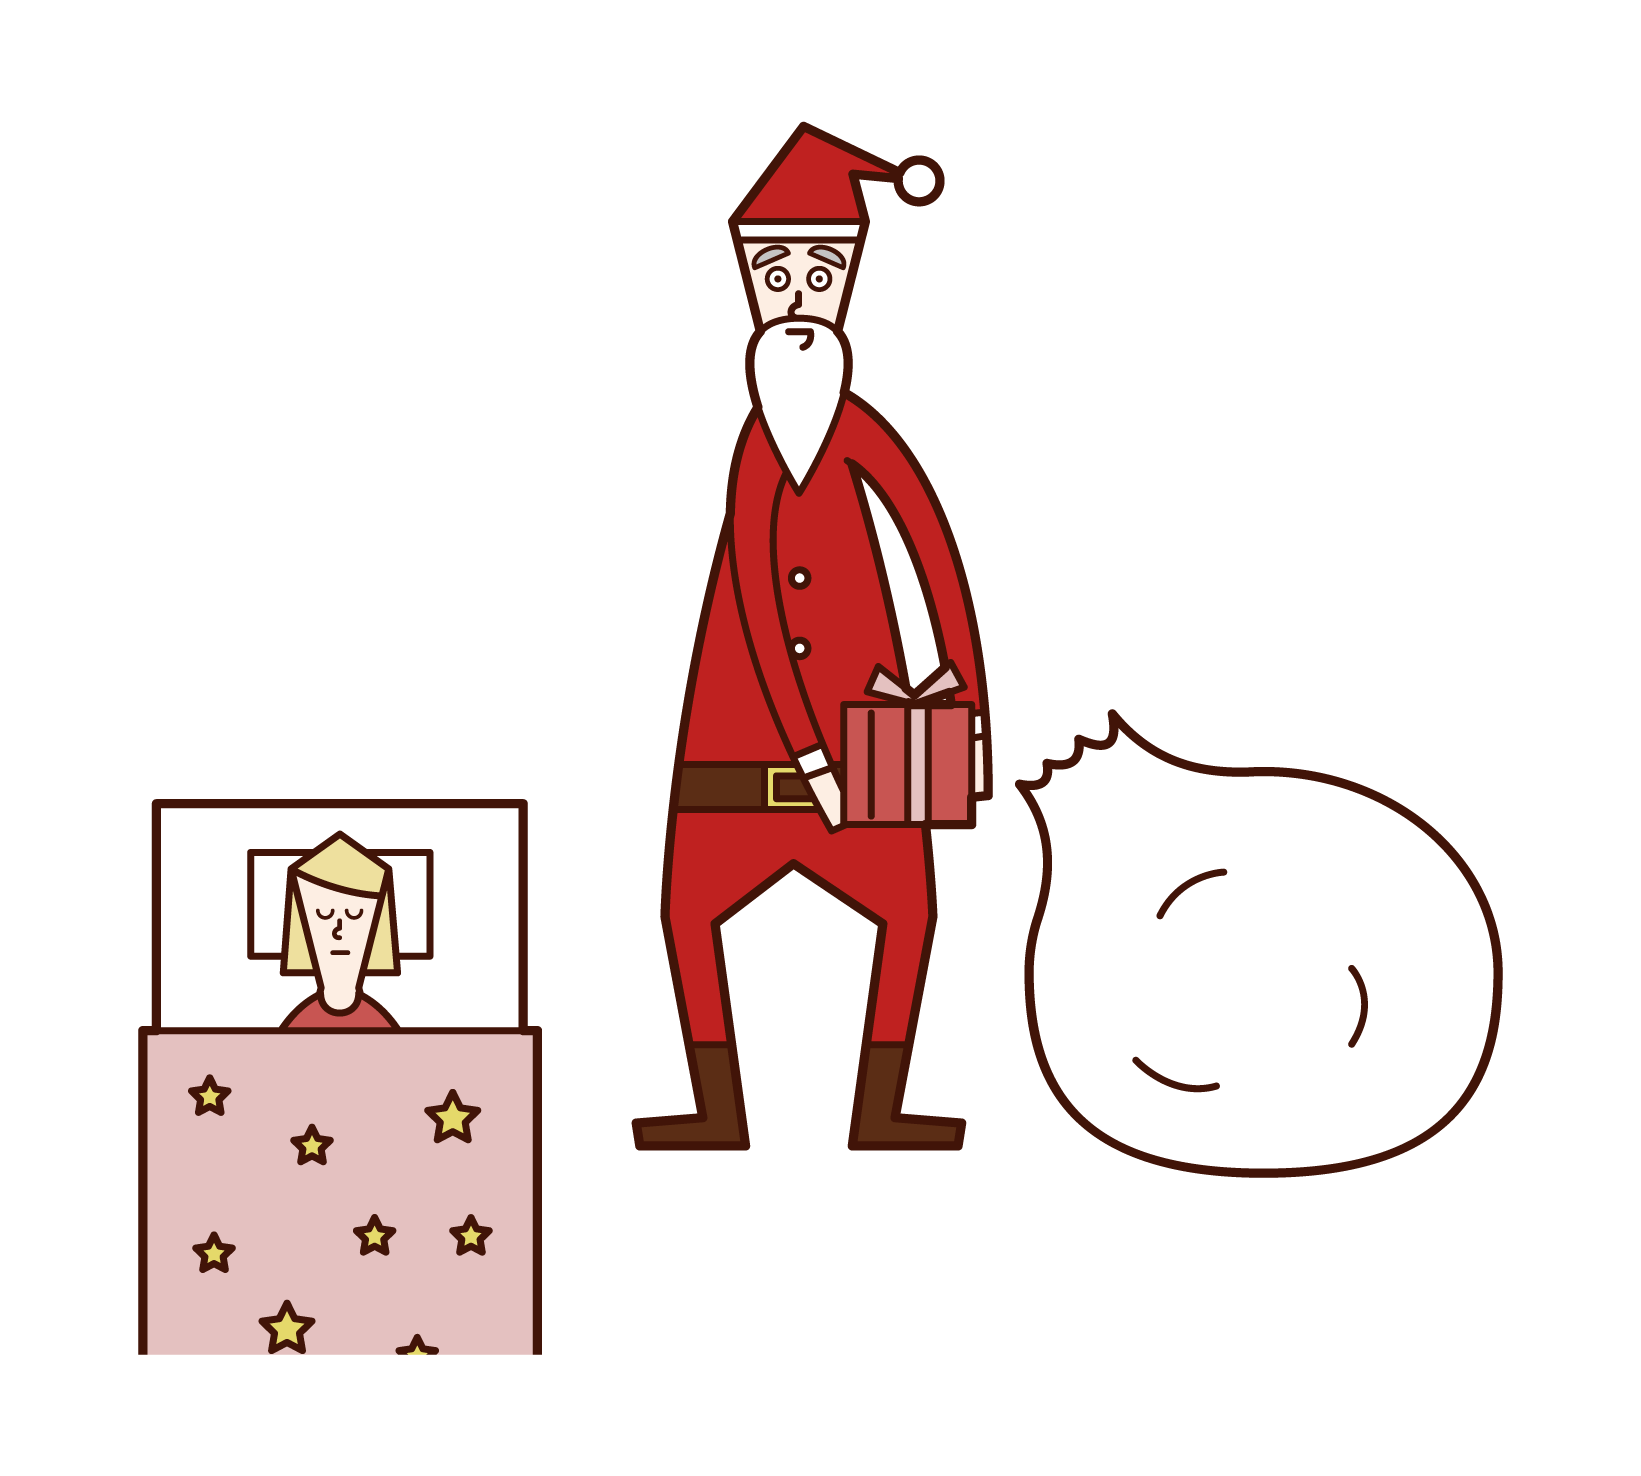 Illustration of Santa Claus putting a present at the bedside